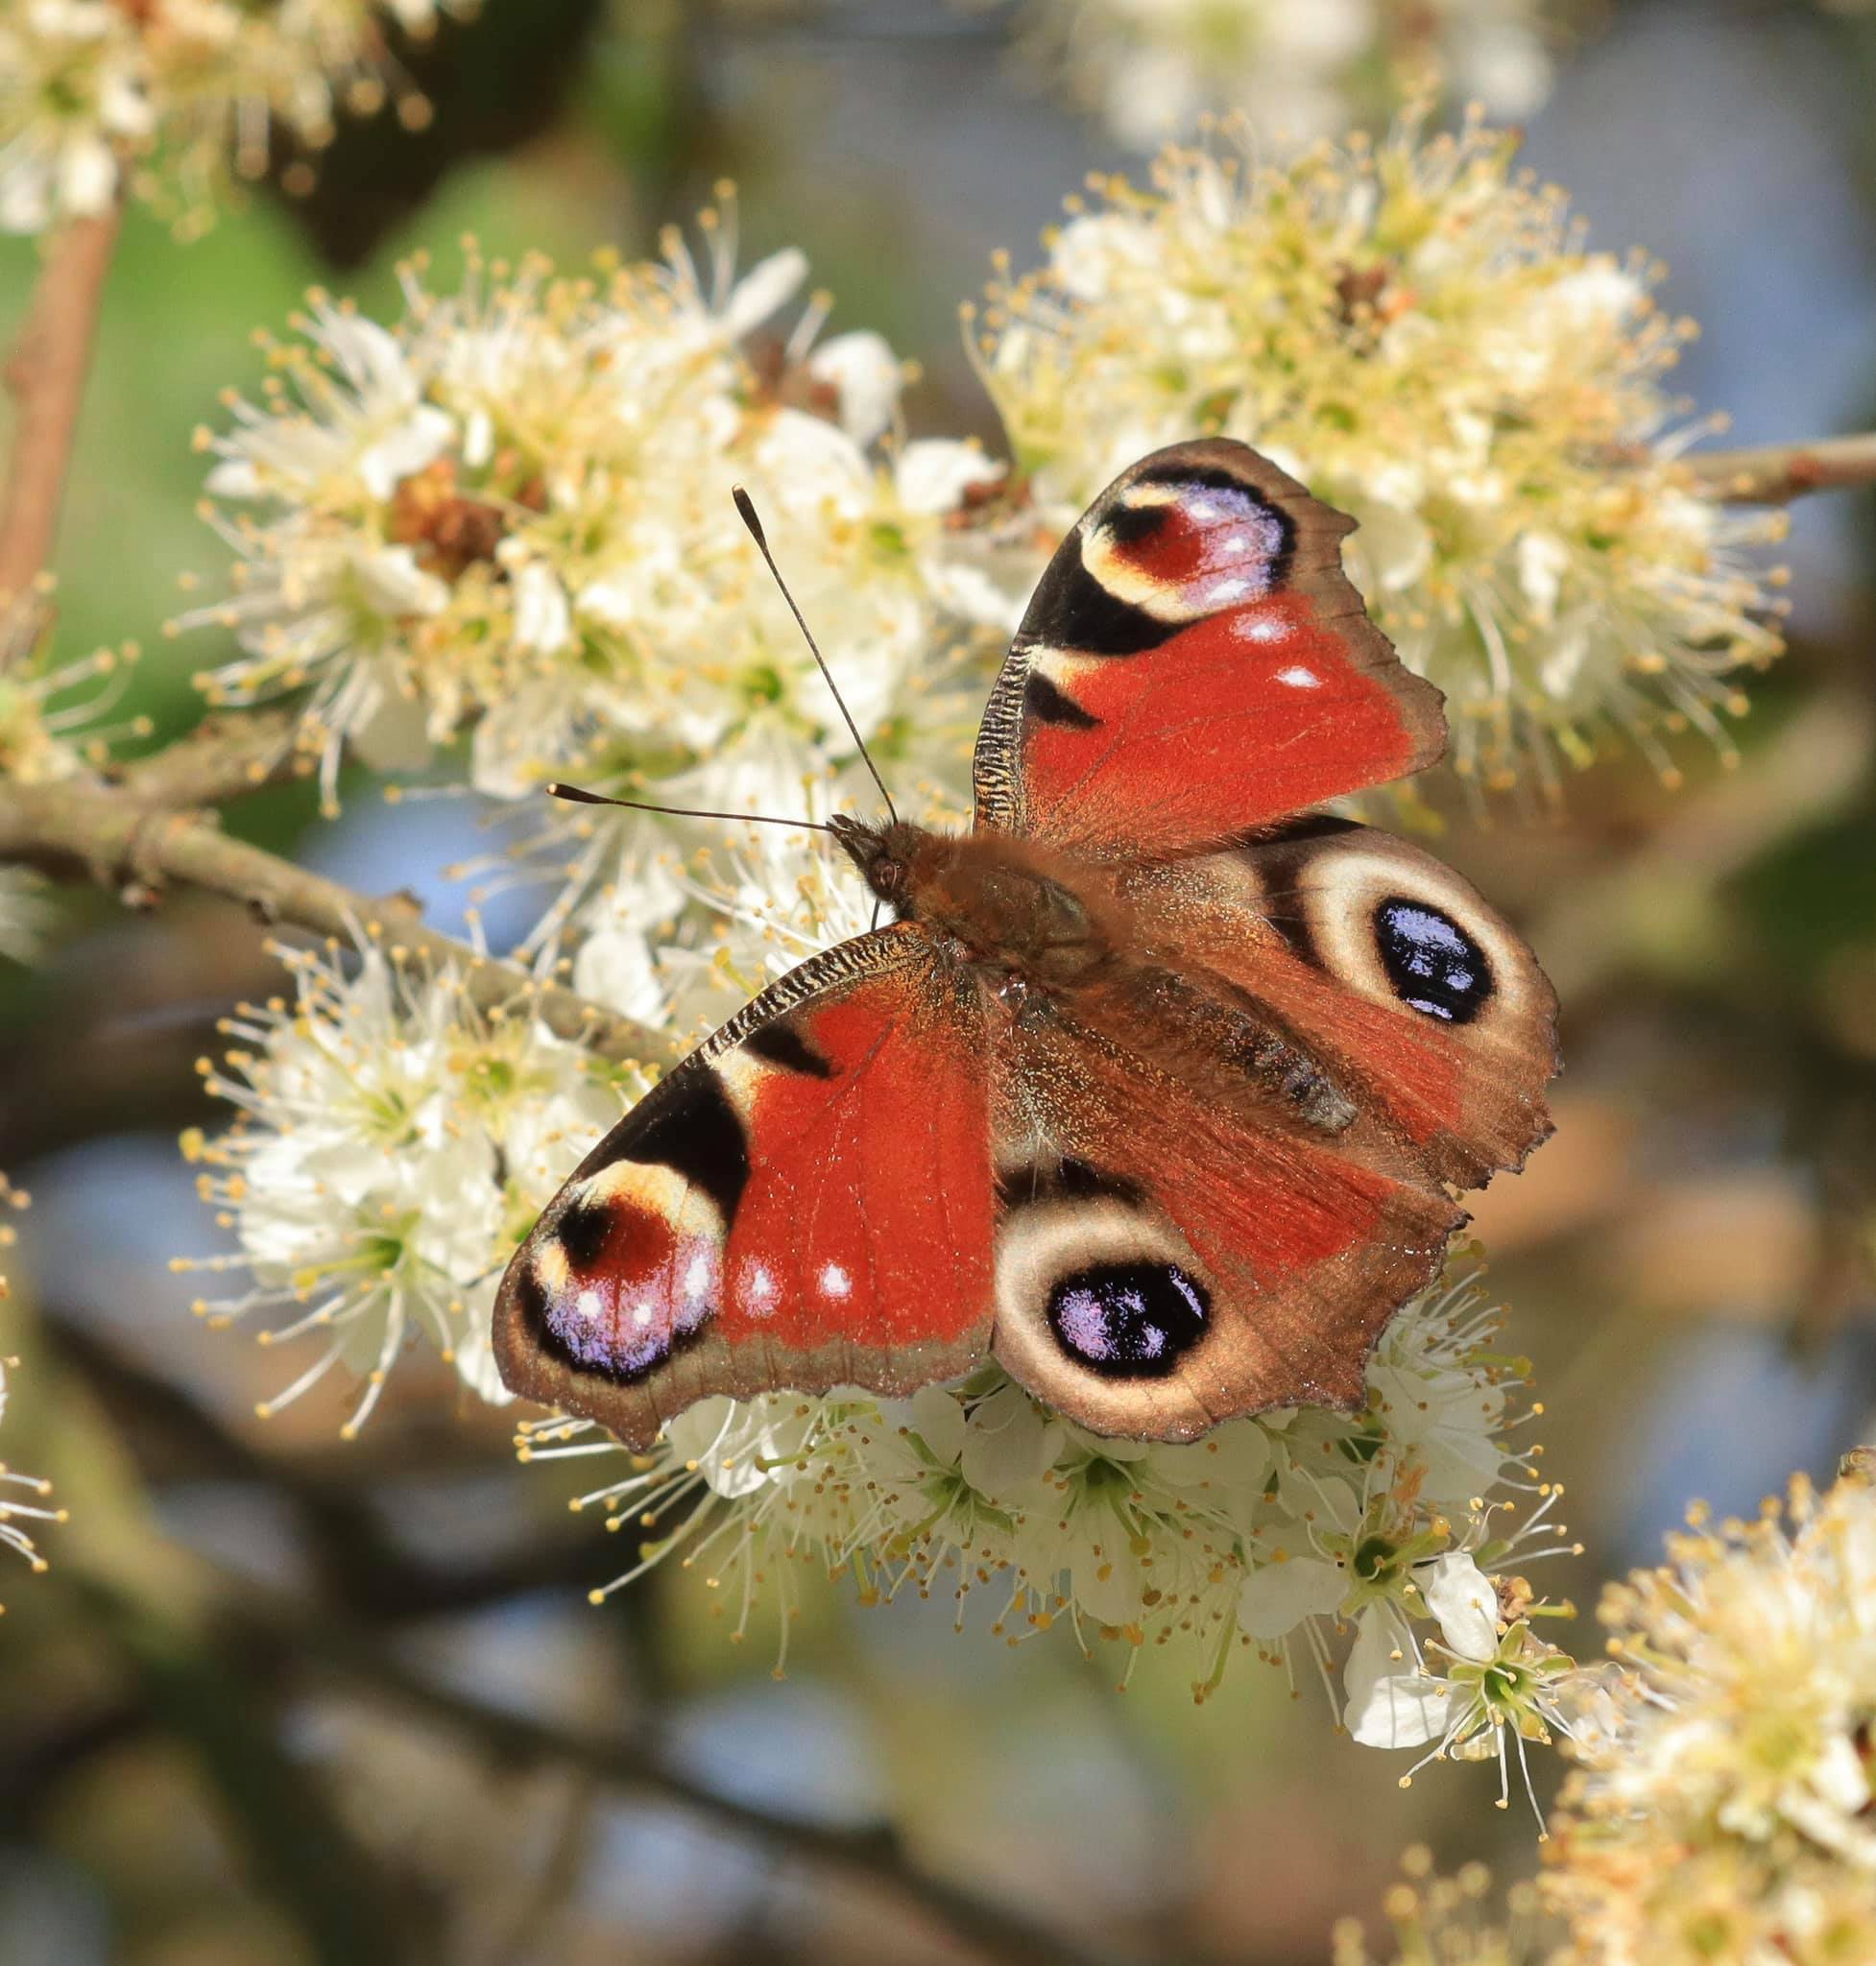 Peacock butterfly on Blackthorn blossom in Cassiobury Park nature reserve. Picture: Stephen Smith